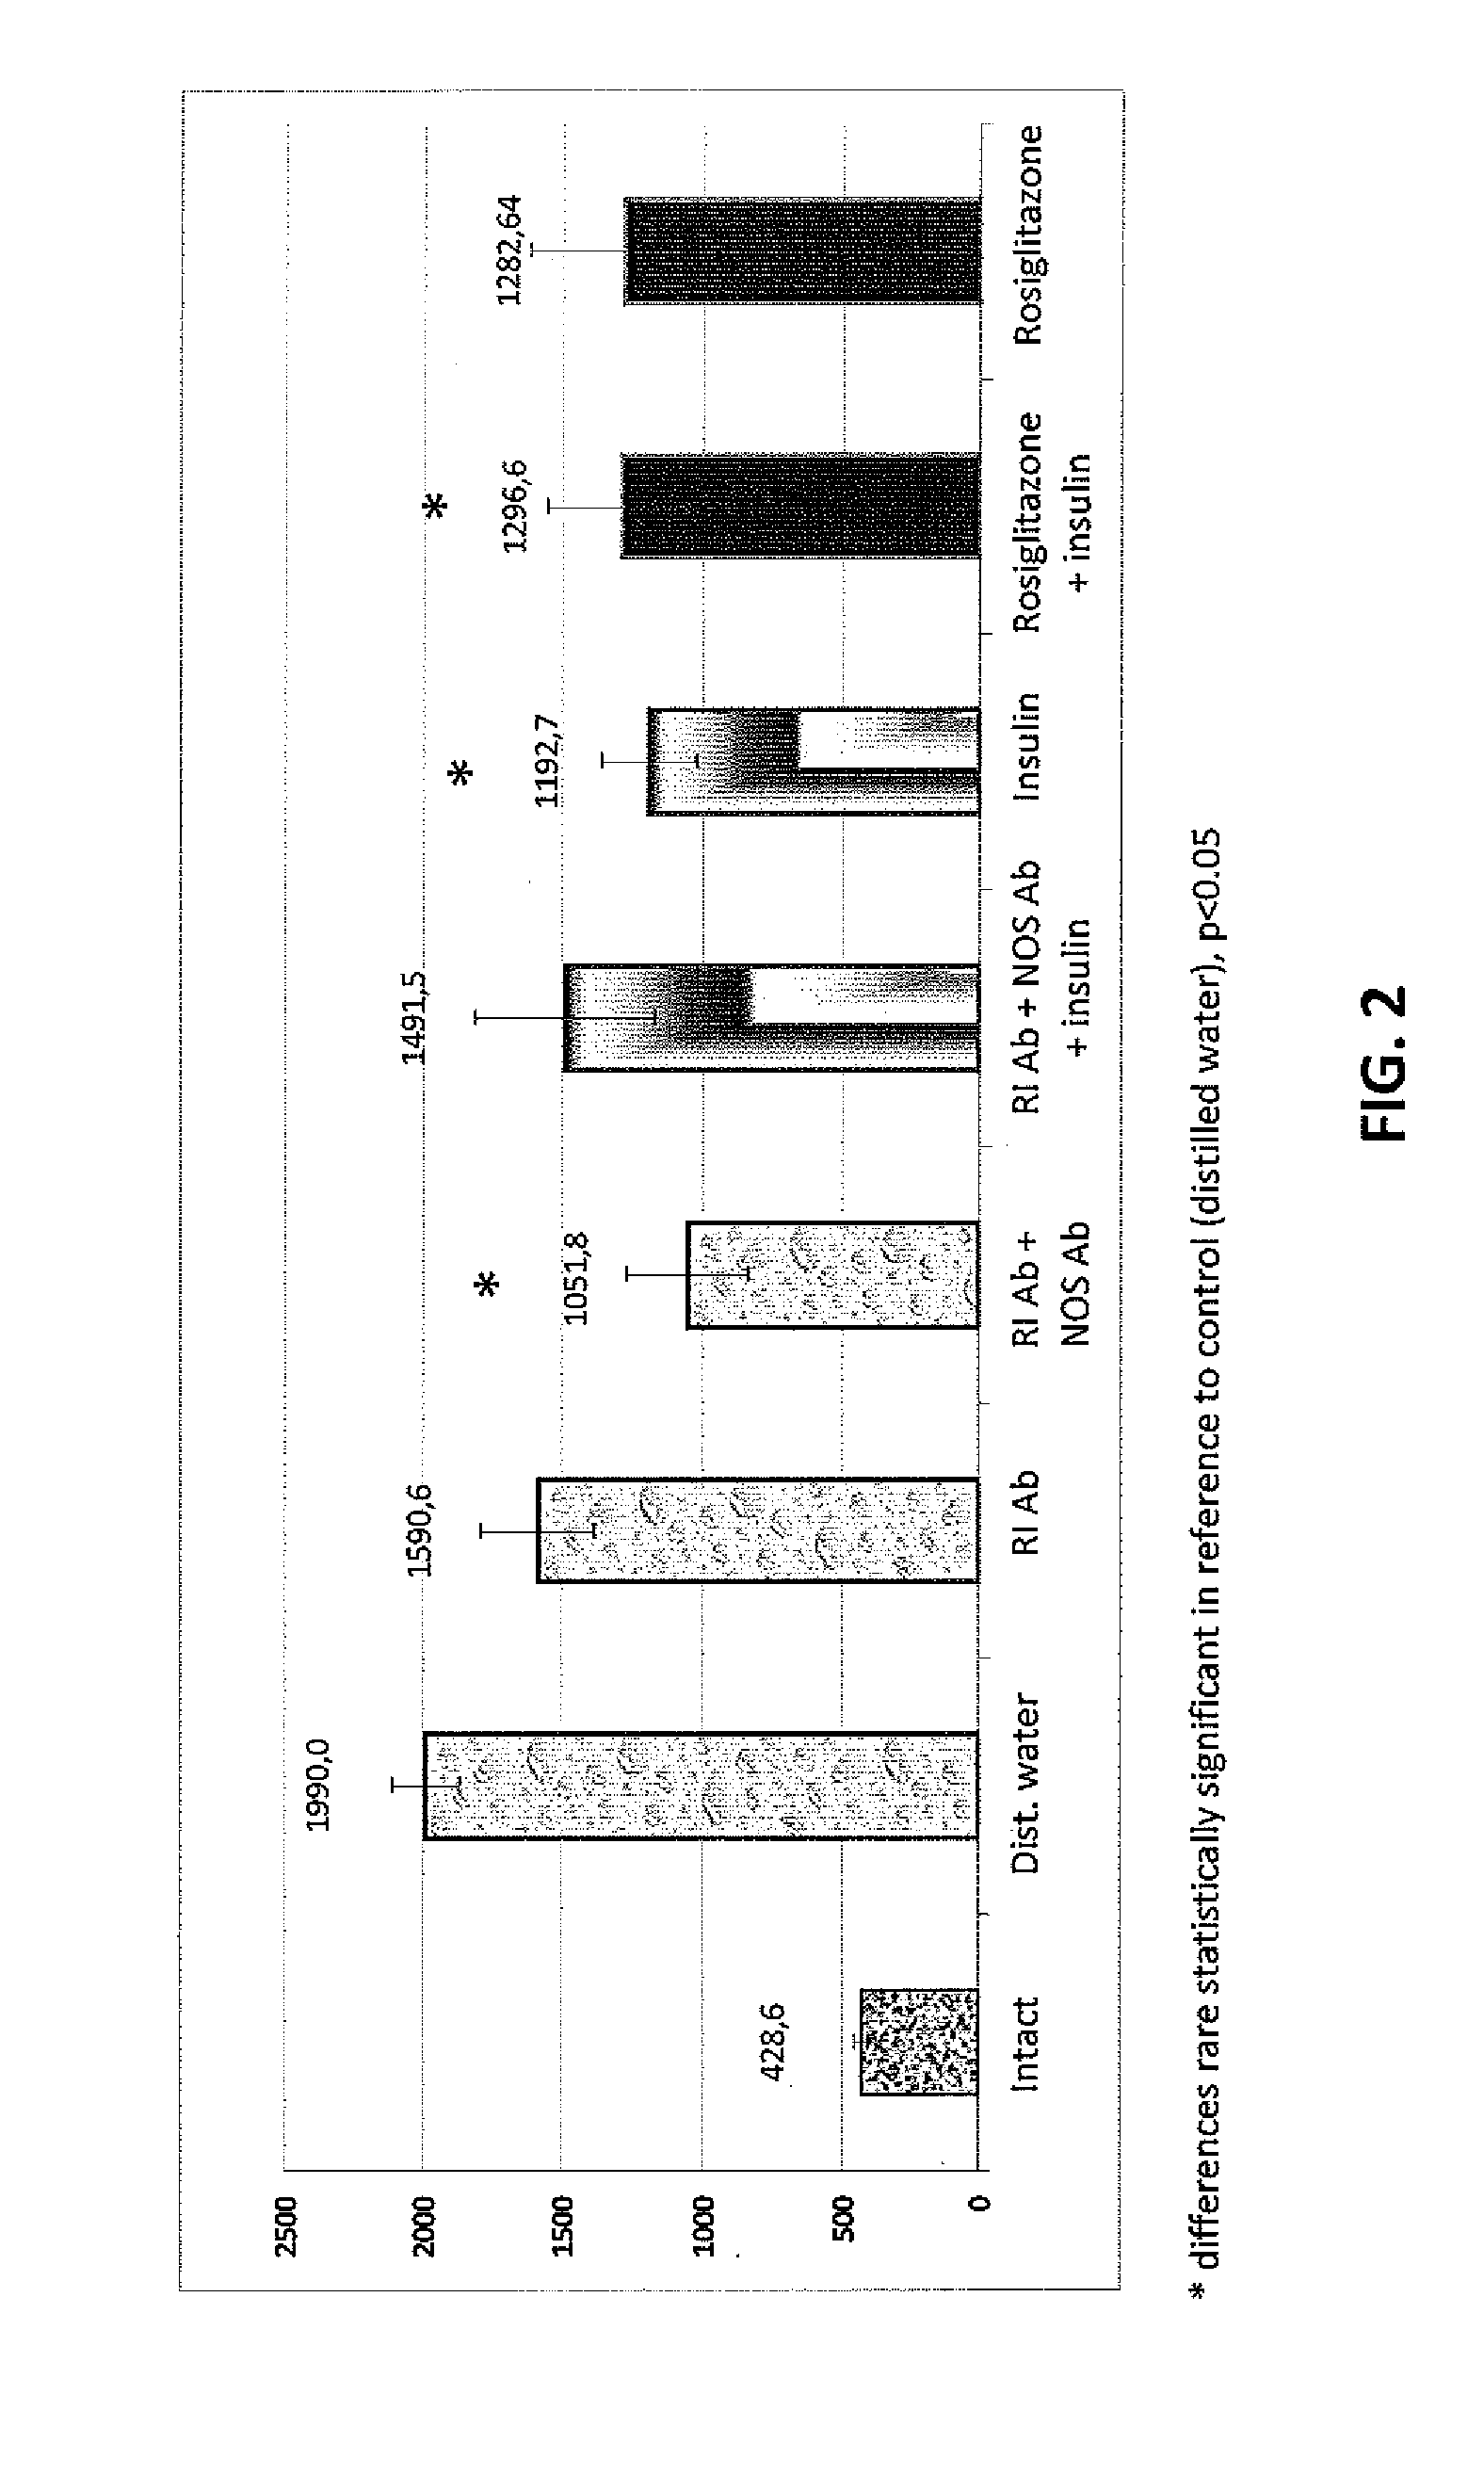 Method of increasing the effect of an activated-potentiated form of an antibody